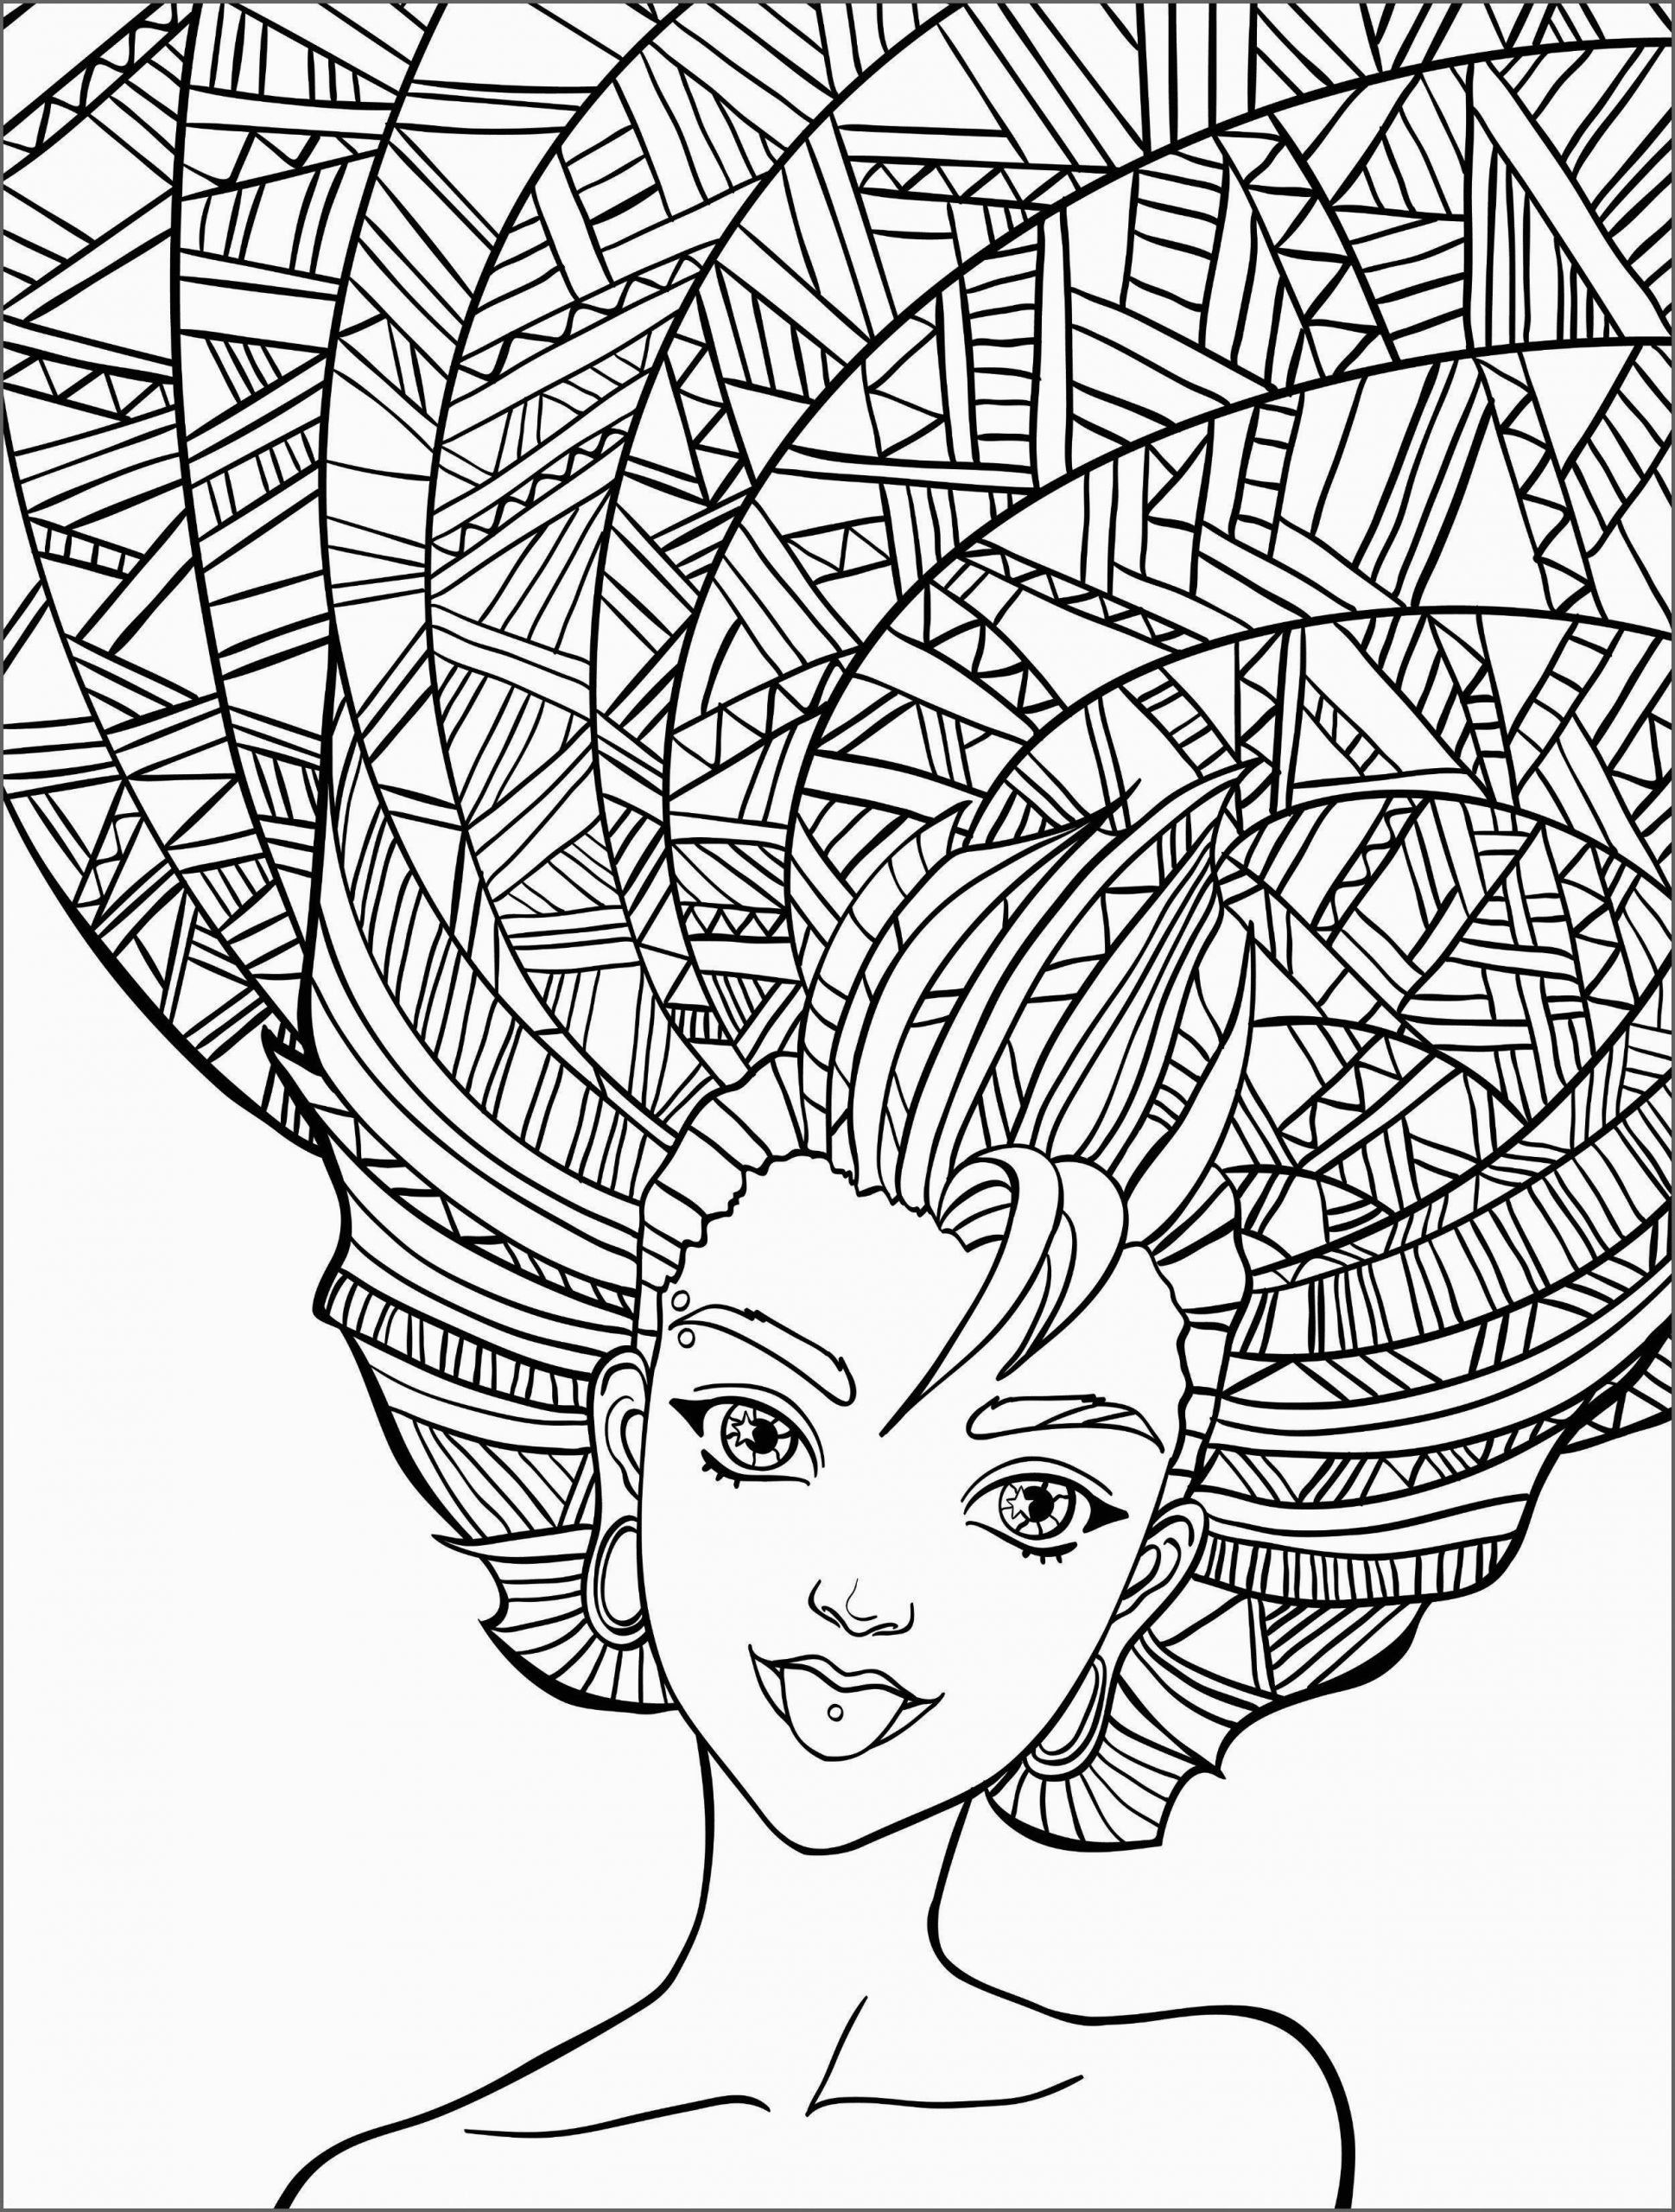 Online Coloring Books For Adults
 Coloring Pages for Adults Best Coloring Pages For Kids